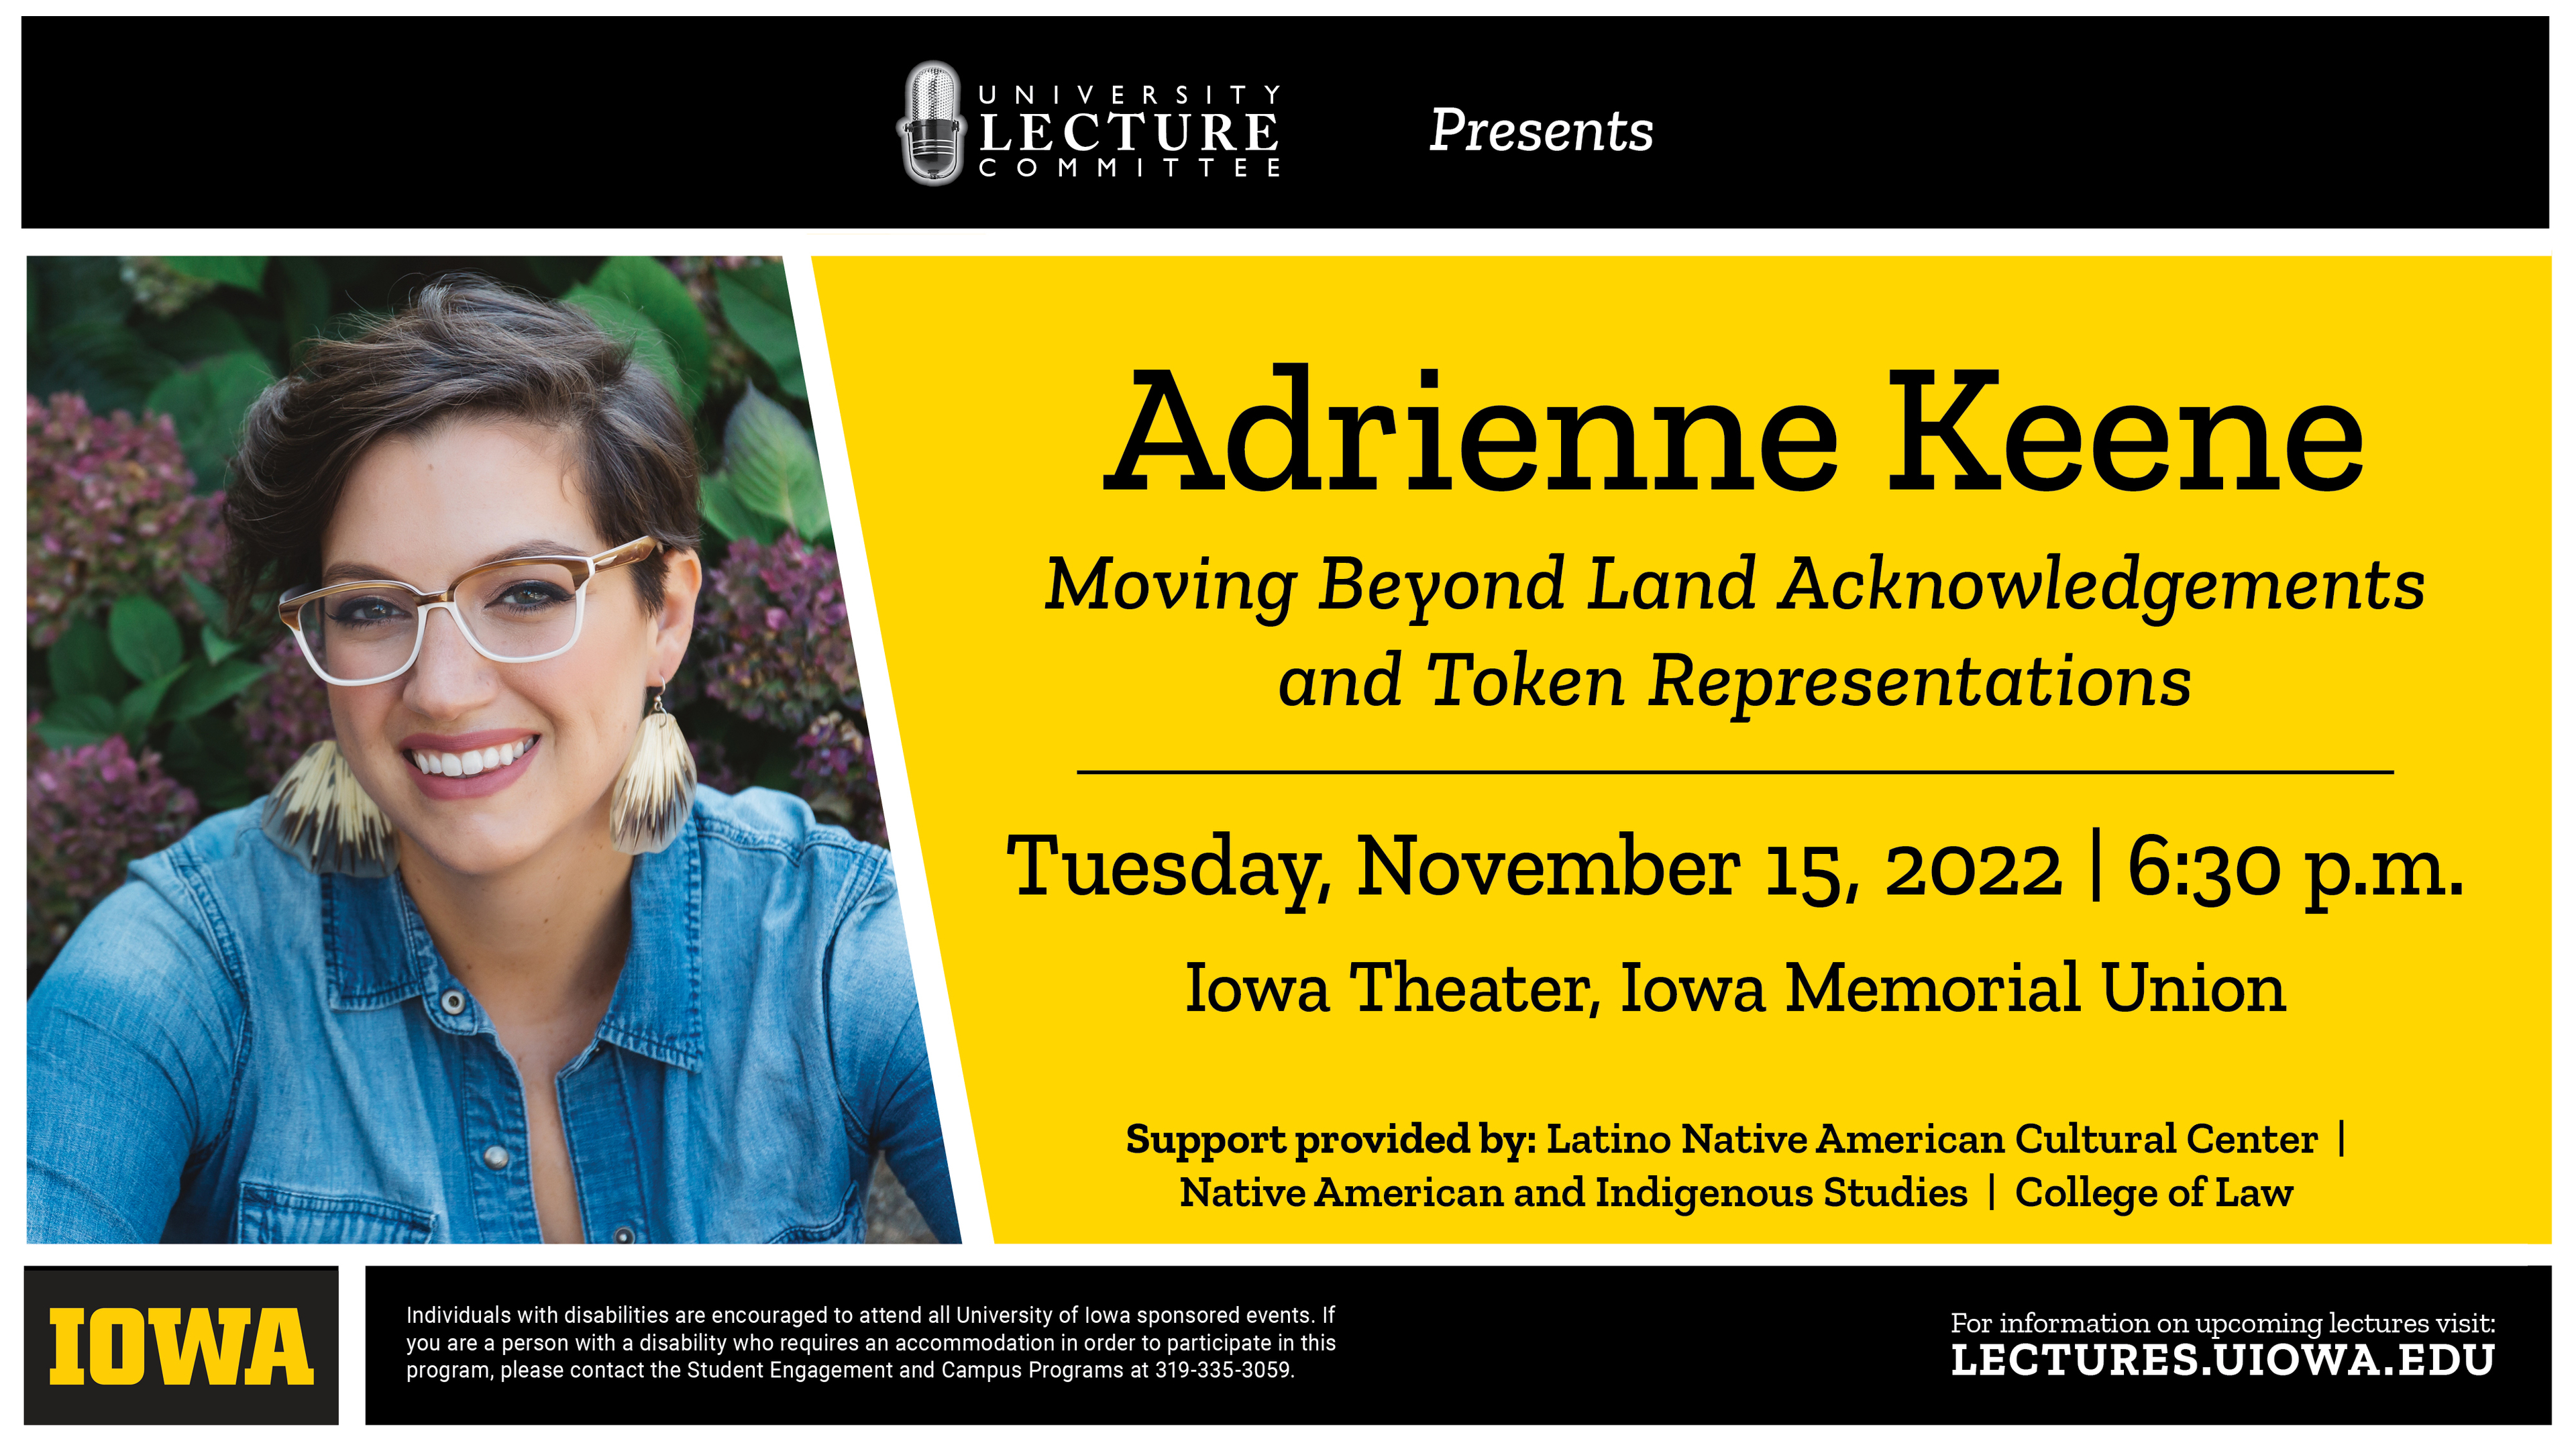 Adrienne Keene: Moving Beyond Land Acknowledgements and Token Representations - Tuesday, Nov. 15th at 6:30 pm in the Iowa Theater in the IMU